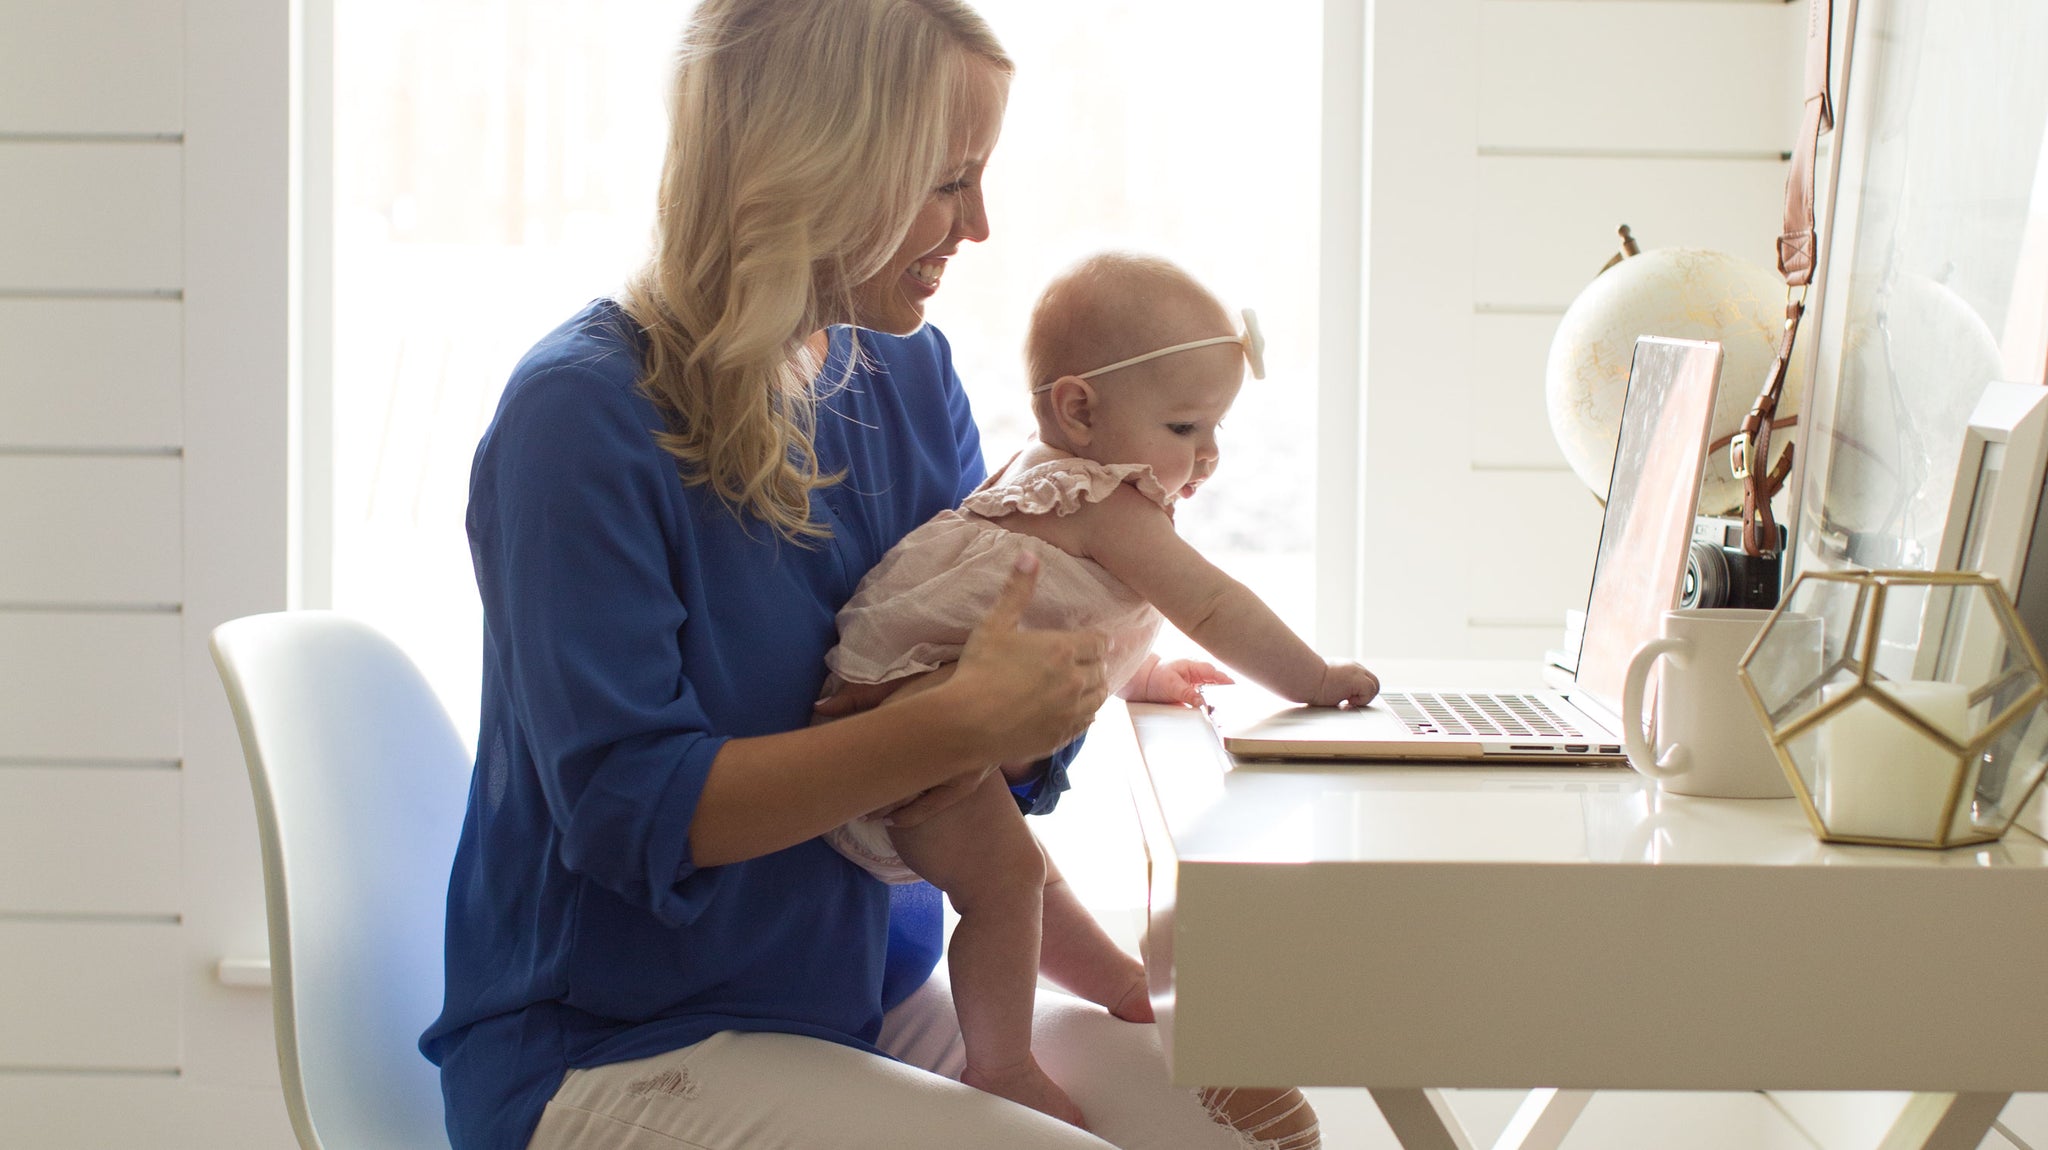 As an encouragement to all our fellow working moms out there, we have outlined 4 daily habits to help you lead a more successful work/life balance and really have it all!